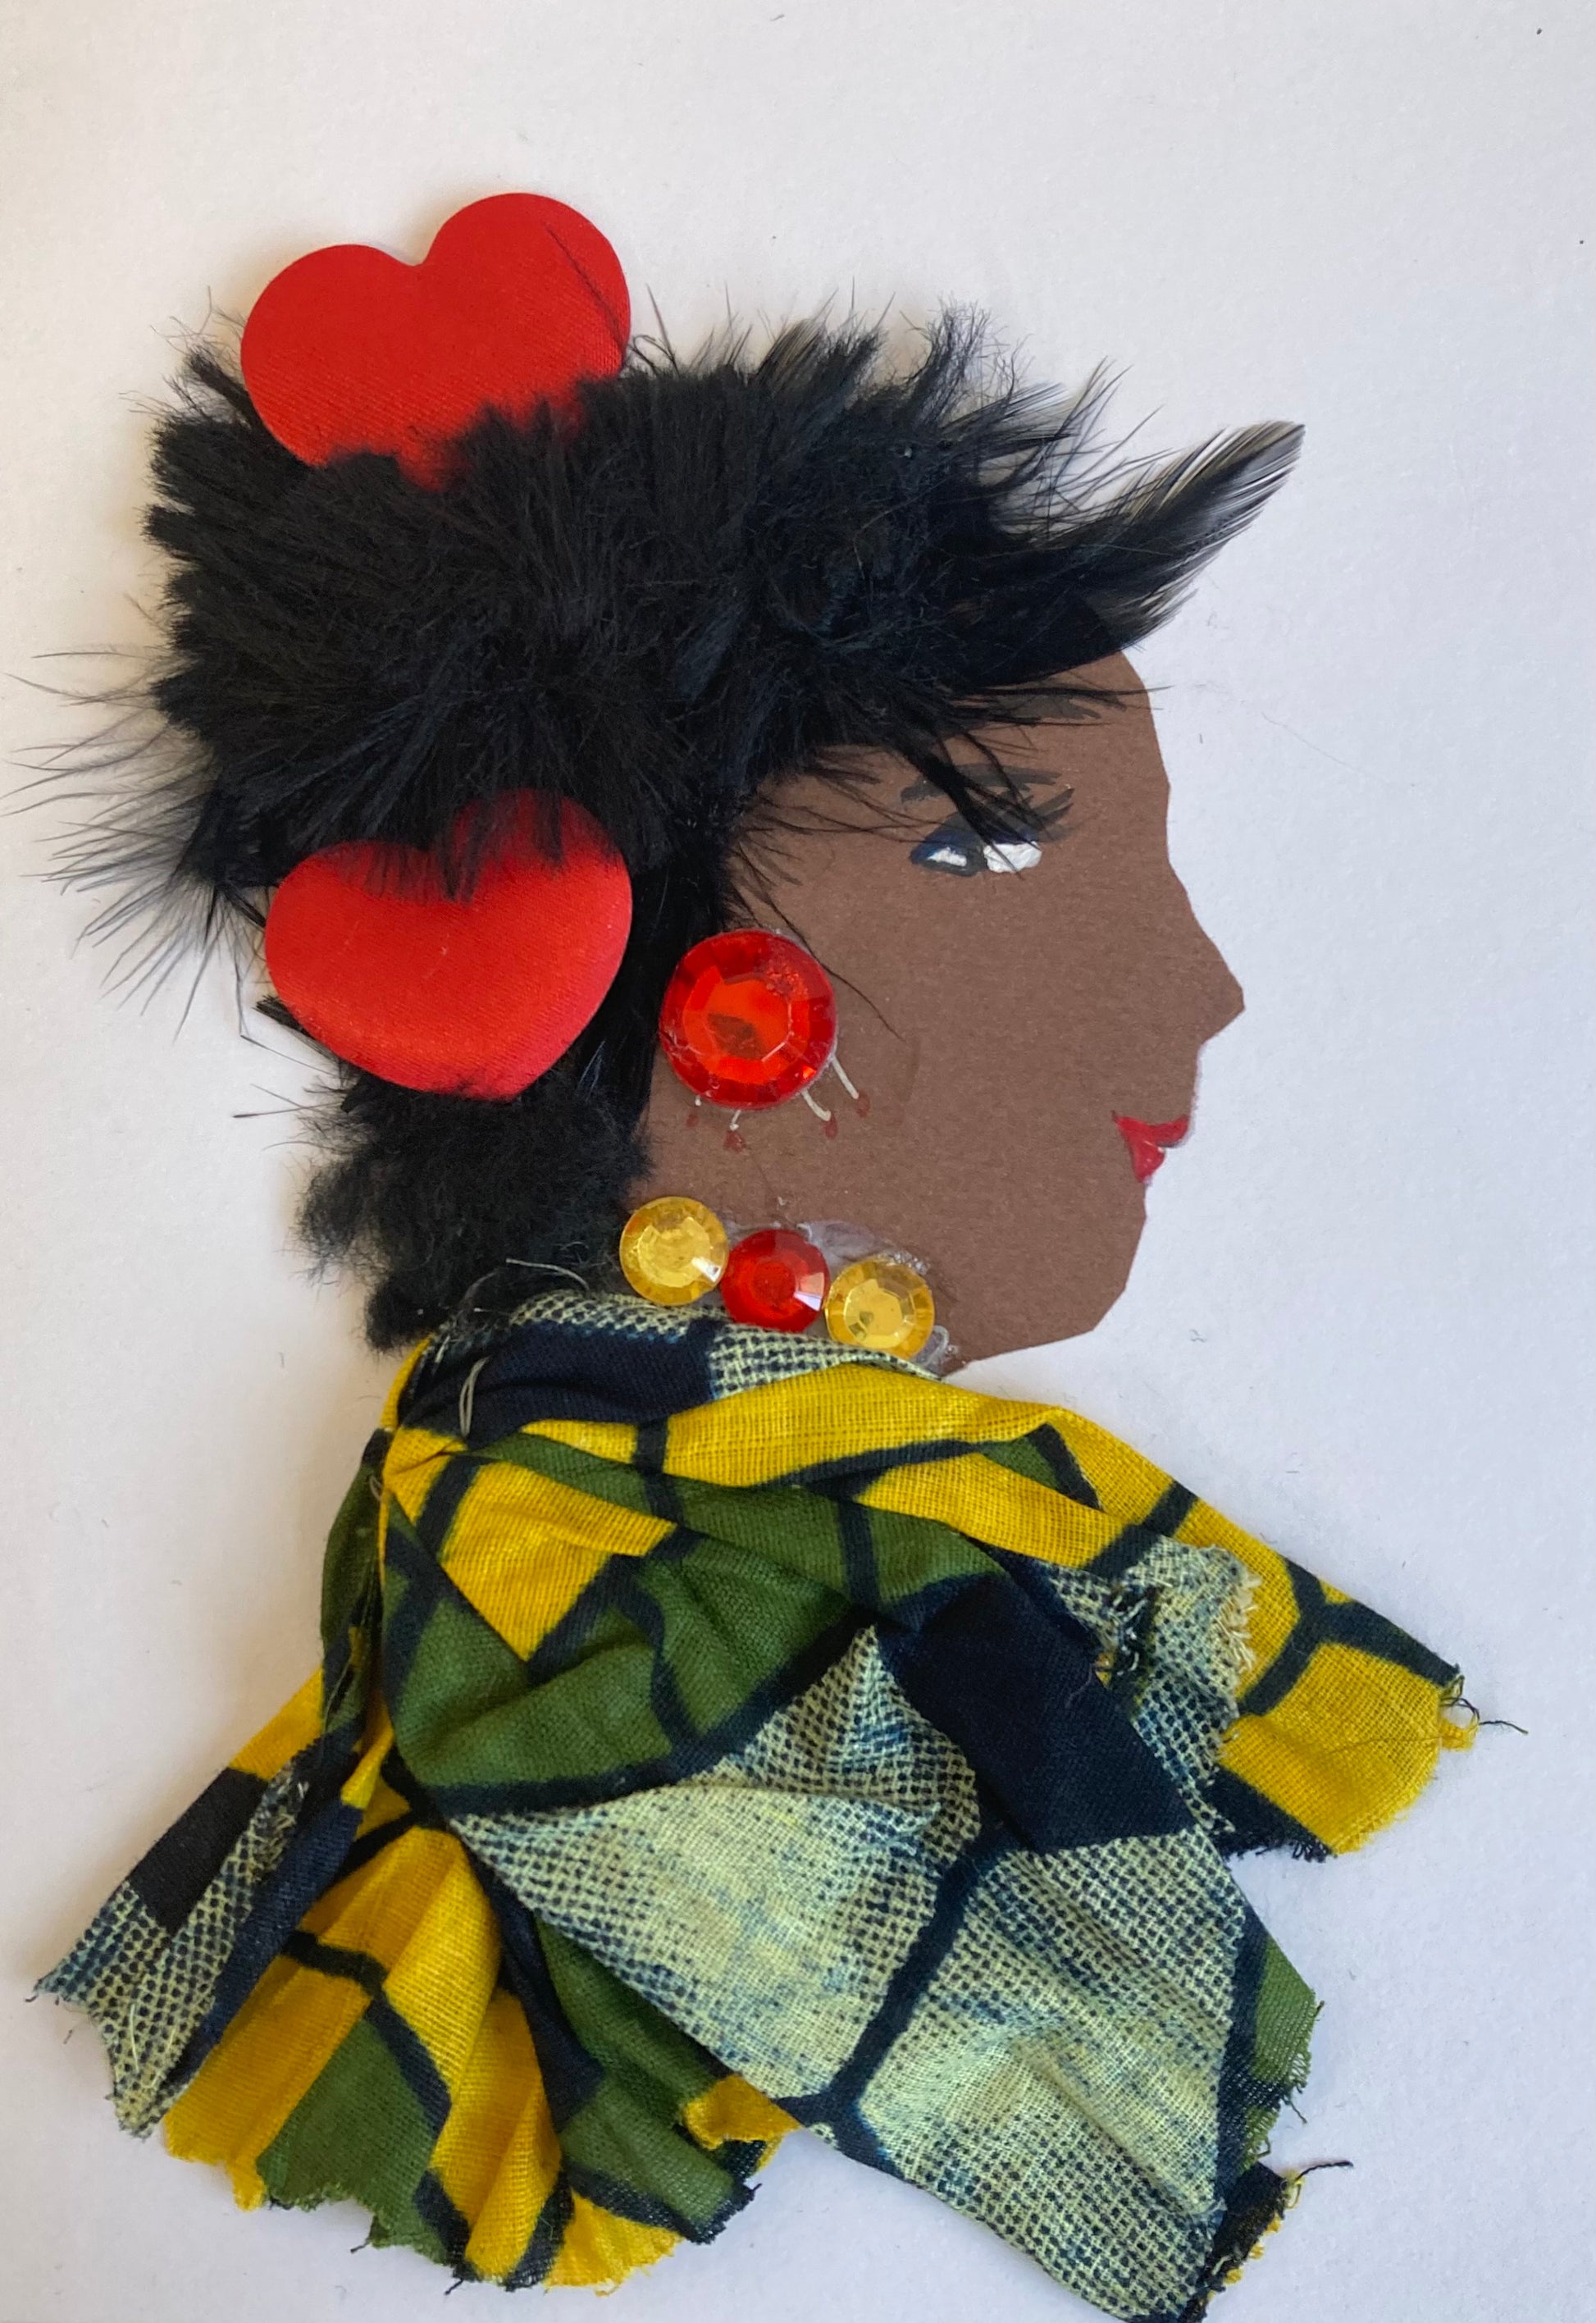 I designed this card of a woman named Glenda. She has a brown skin tone and is wearing a stunning patterned bloused filled with colours of green, yellow, and blue. There are two red hearts in her hair. She has on her statement red earrings and her yellow and red necklace to tie the look together.